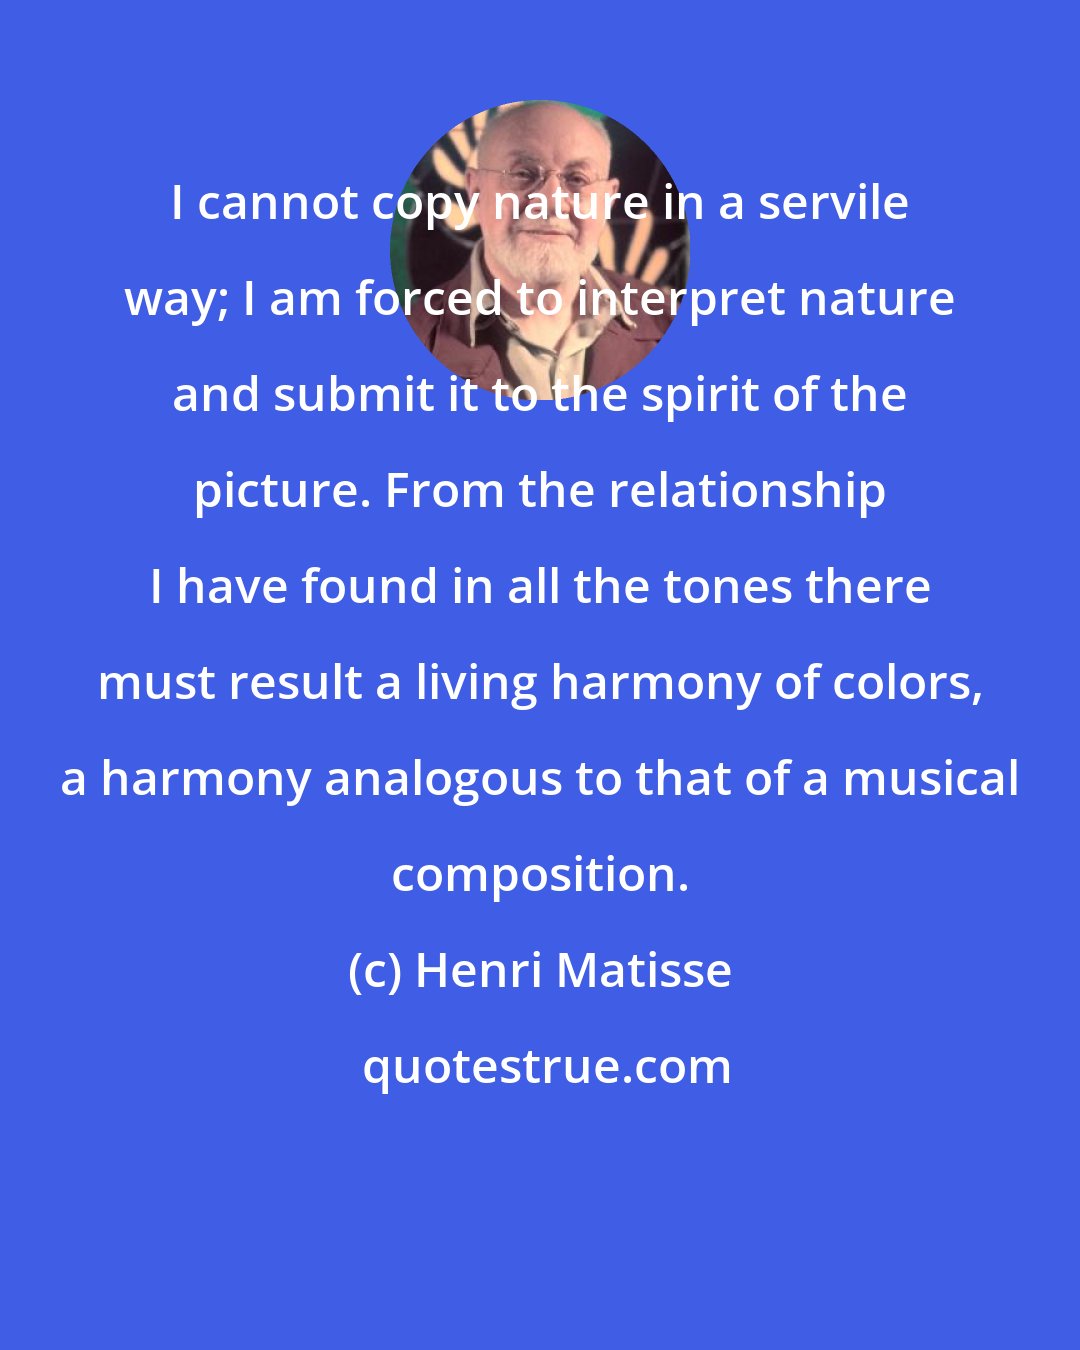 Henri Matisse: I cannot copy nature in a servile way; I am forced to interpret nature and submit it to the spirit of the picture. From the relationship I have found in all the tones there must result a living harmony of colors, a harmony analogous to that of a musical composition.